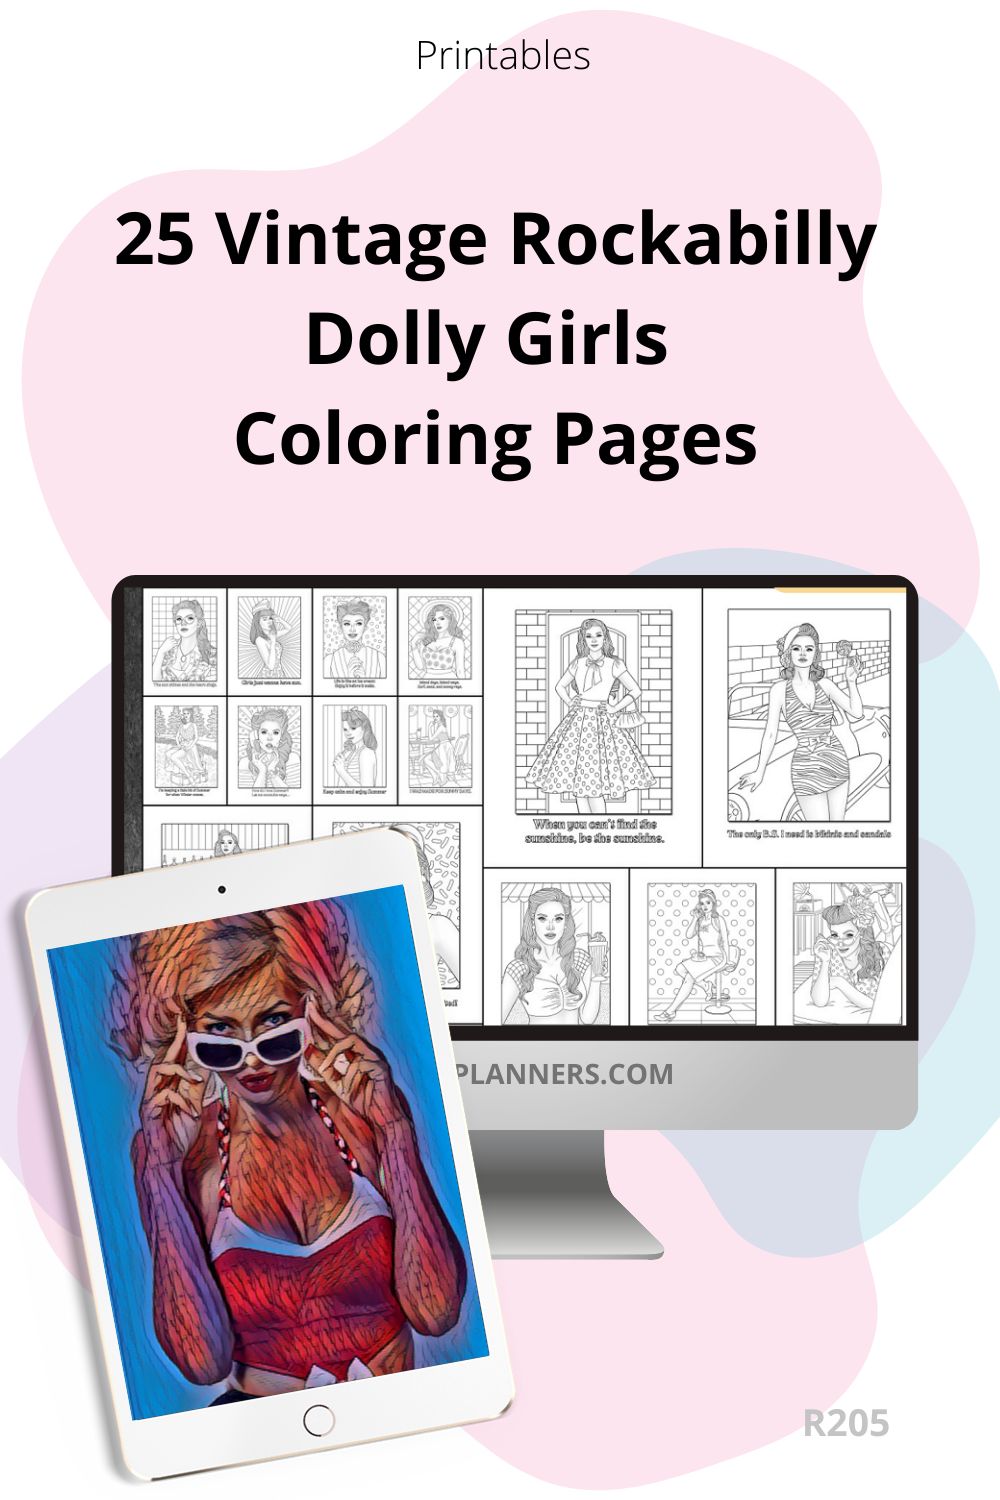 25 Retro Vintage Rockabilly Dolly 1950s Pin Up Girls Ladies Coloring Pages. R205